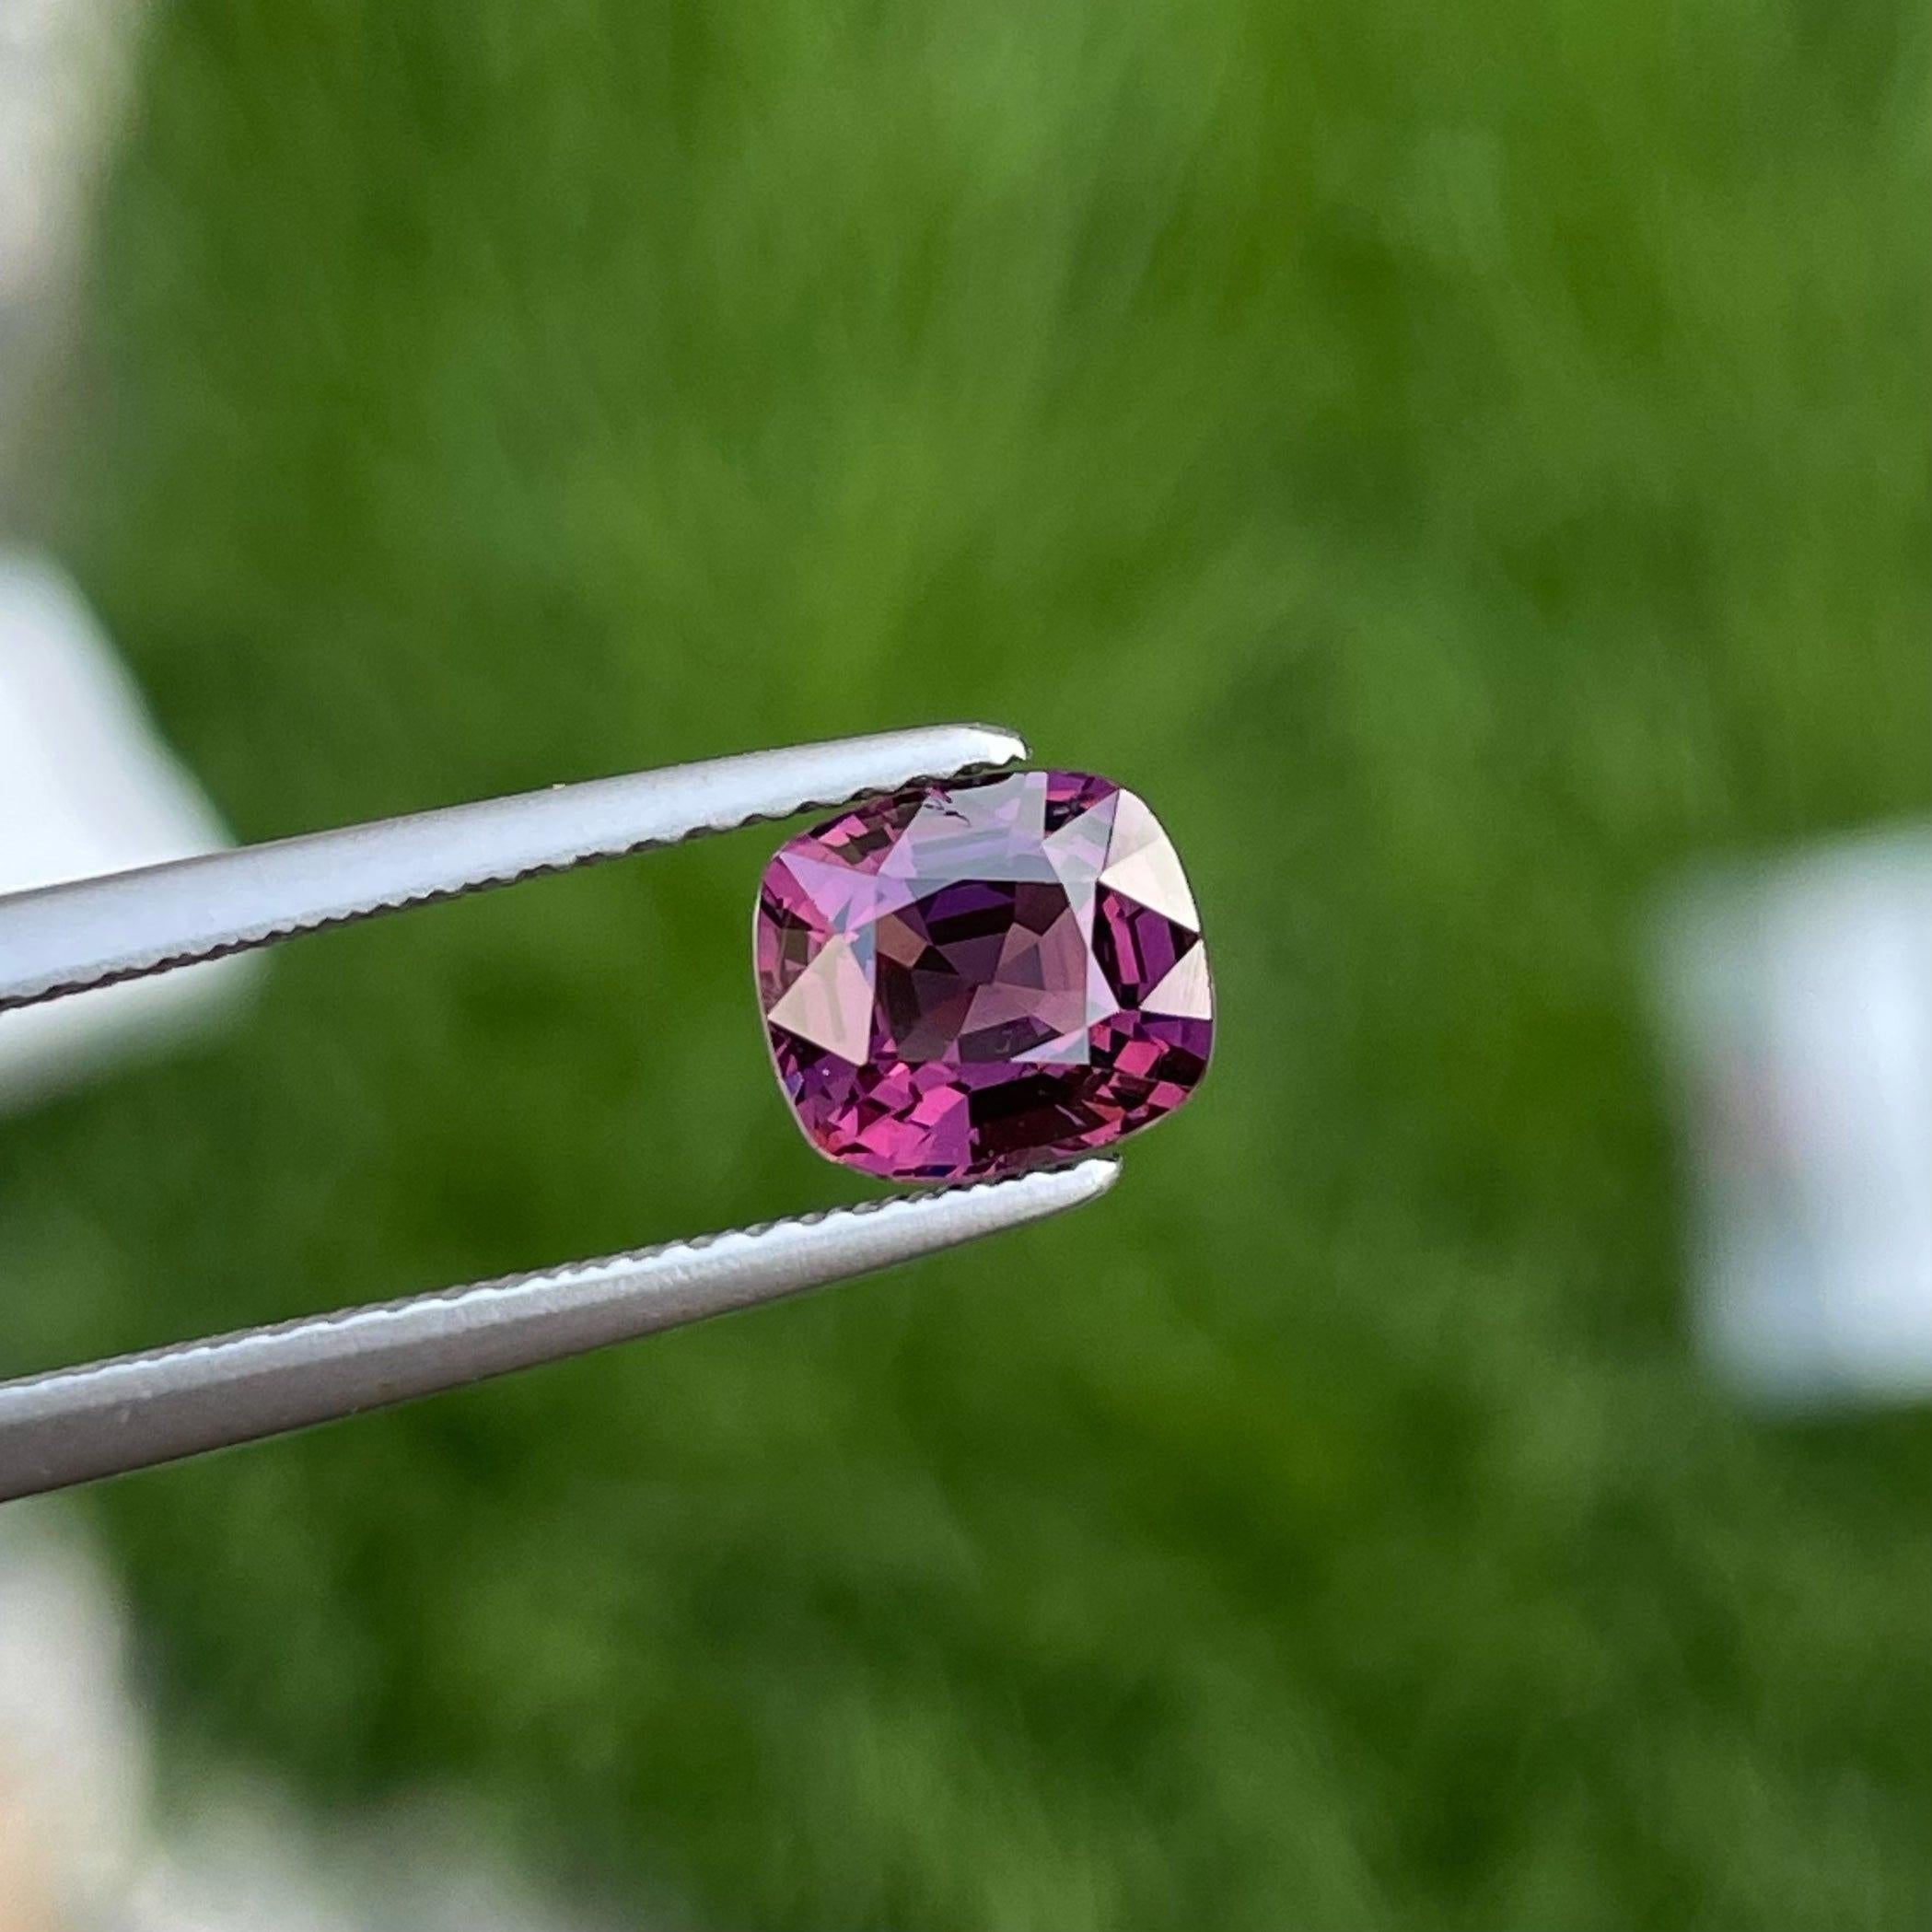 spinel metaphysical properties